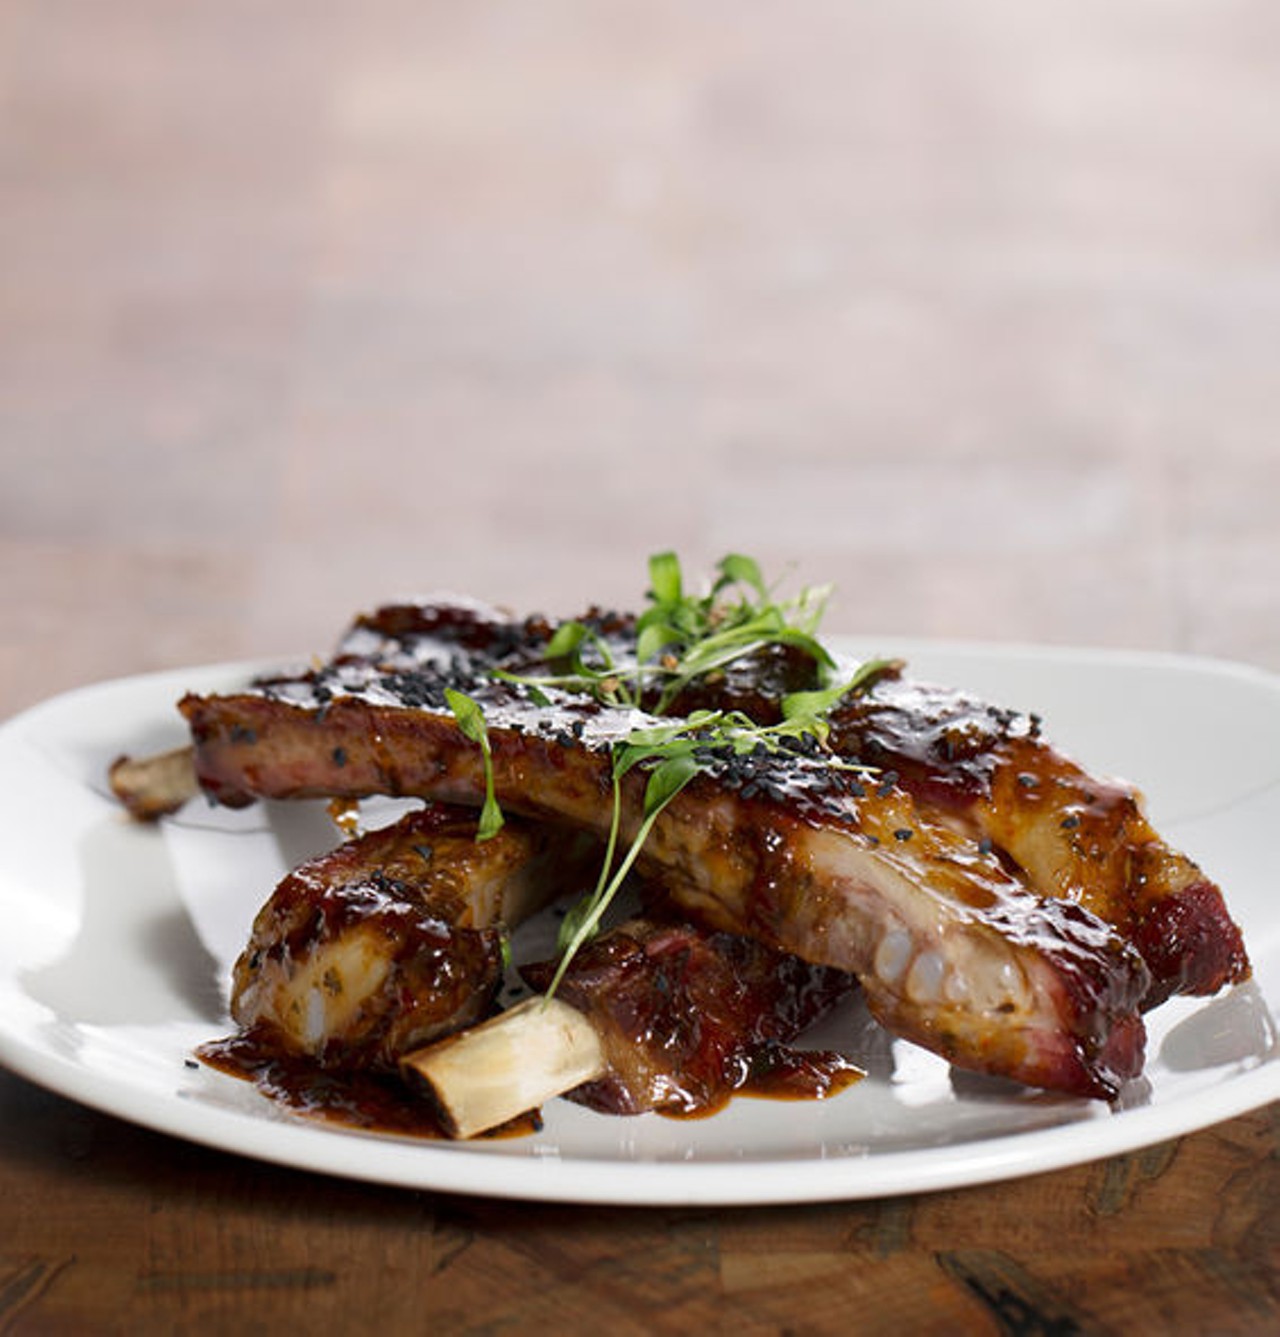 Raincrow Ranch smoked pork ribs with an Asian barbecue glaze. See more photos: Inside the Restaurant at the Cheshire.